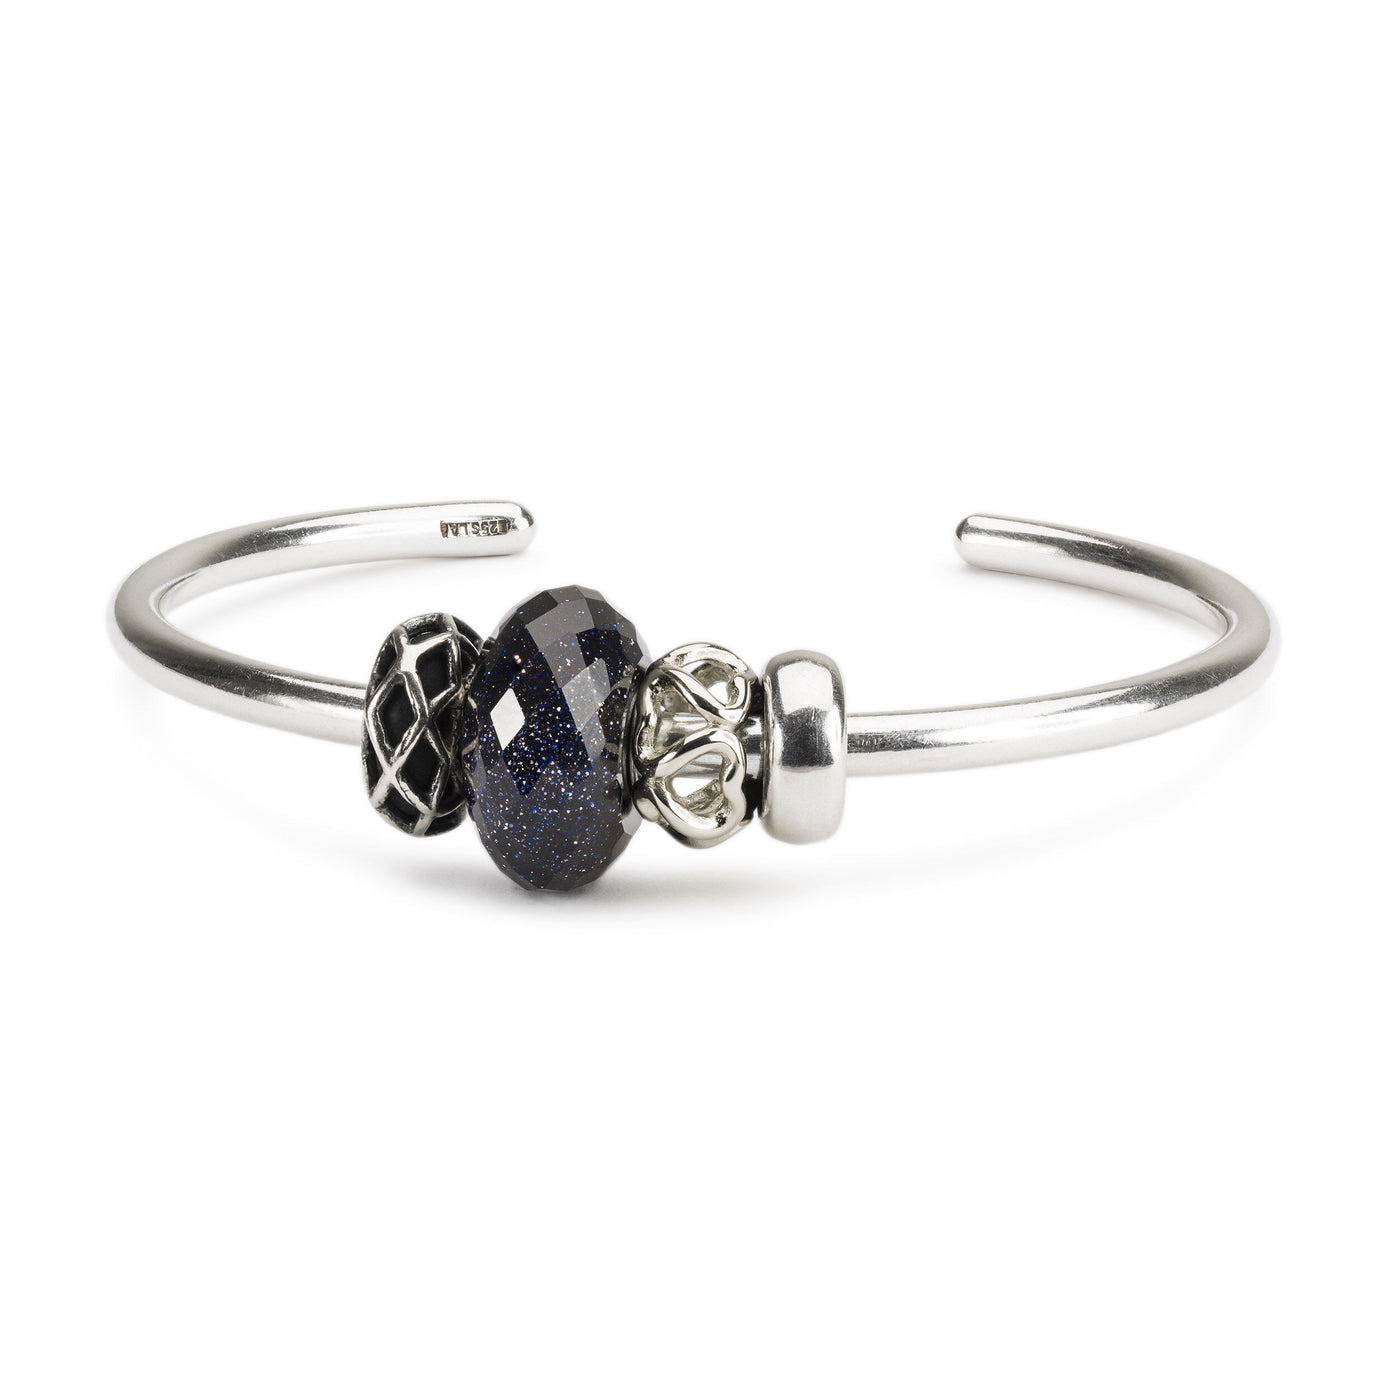 Connection - Trollbeads Canada